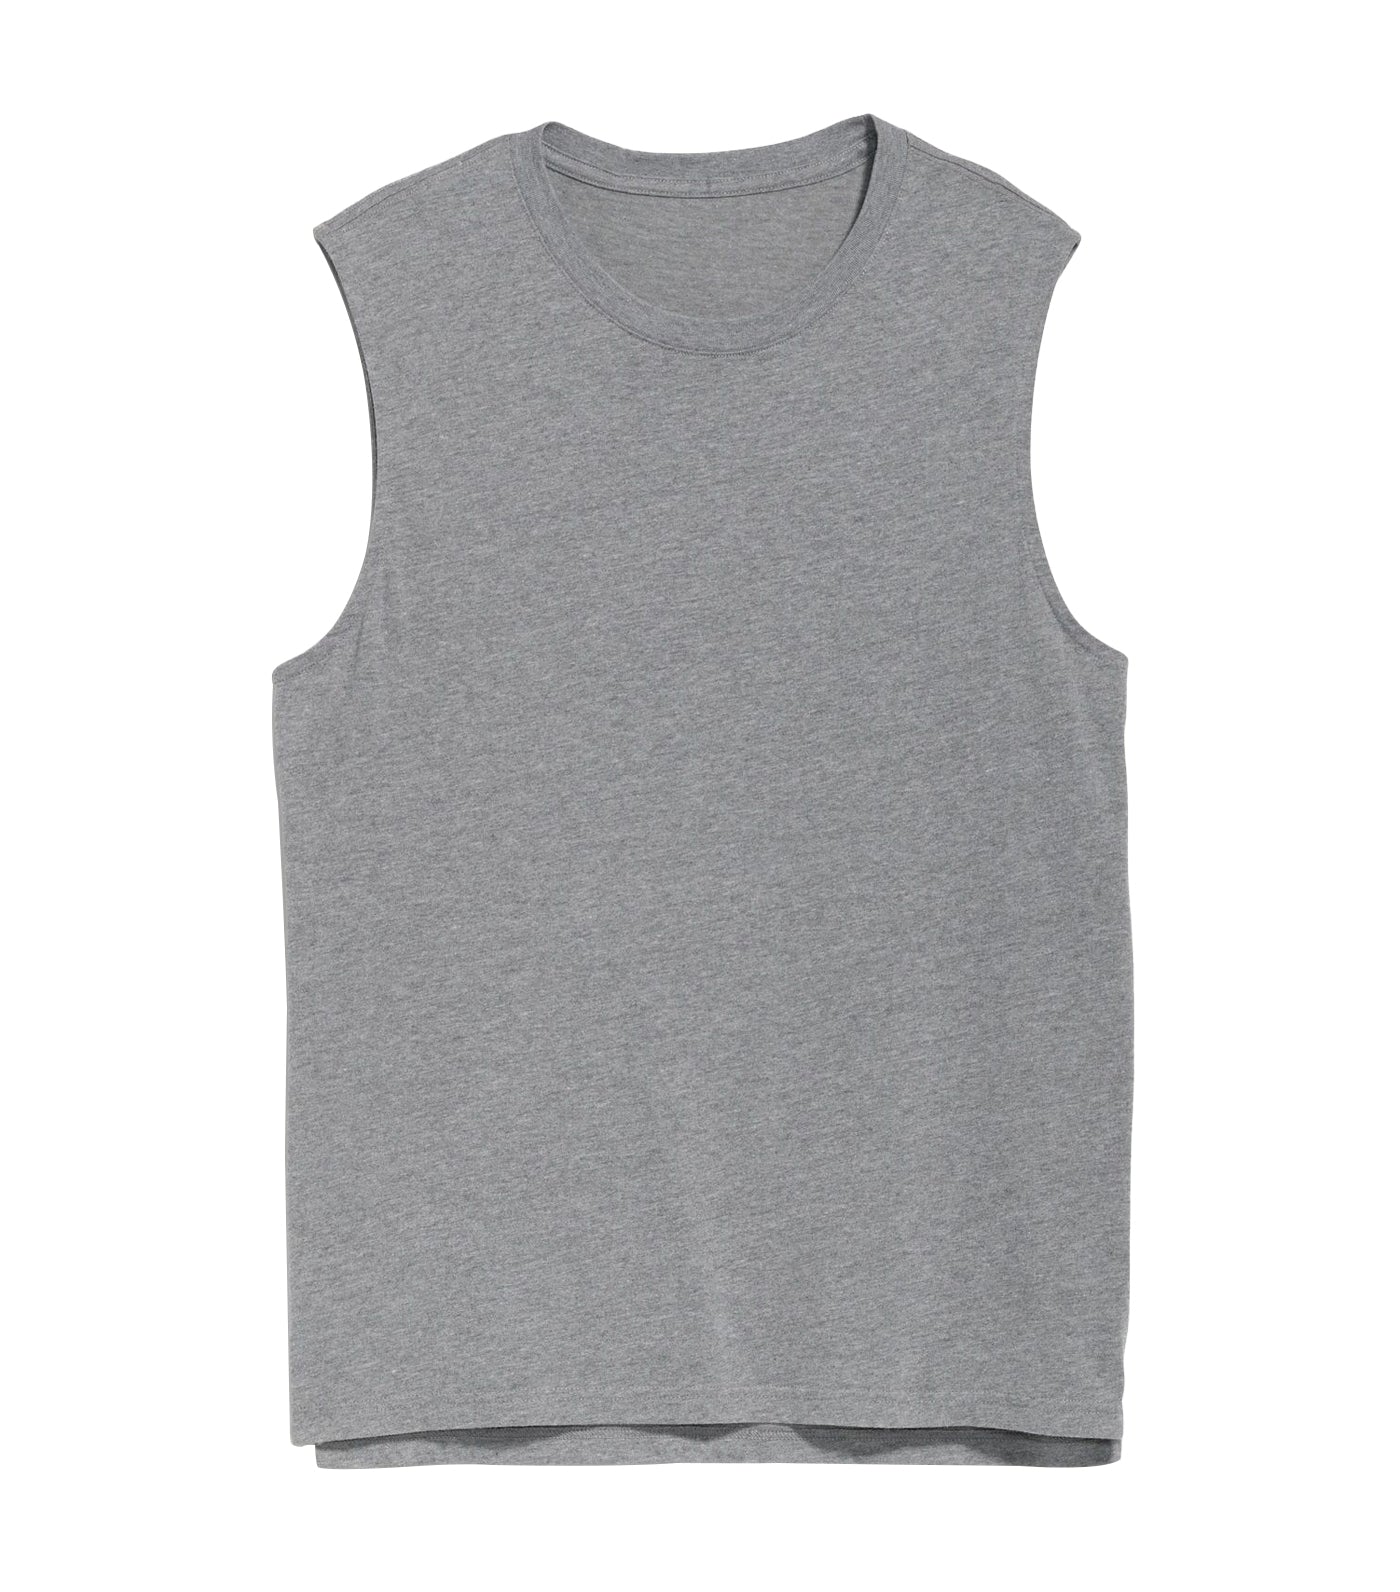 Soft-Washed Muscle Tank Top for Men Heather Gray